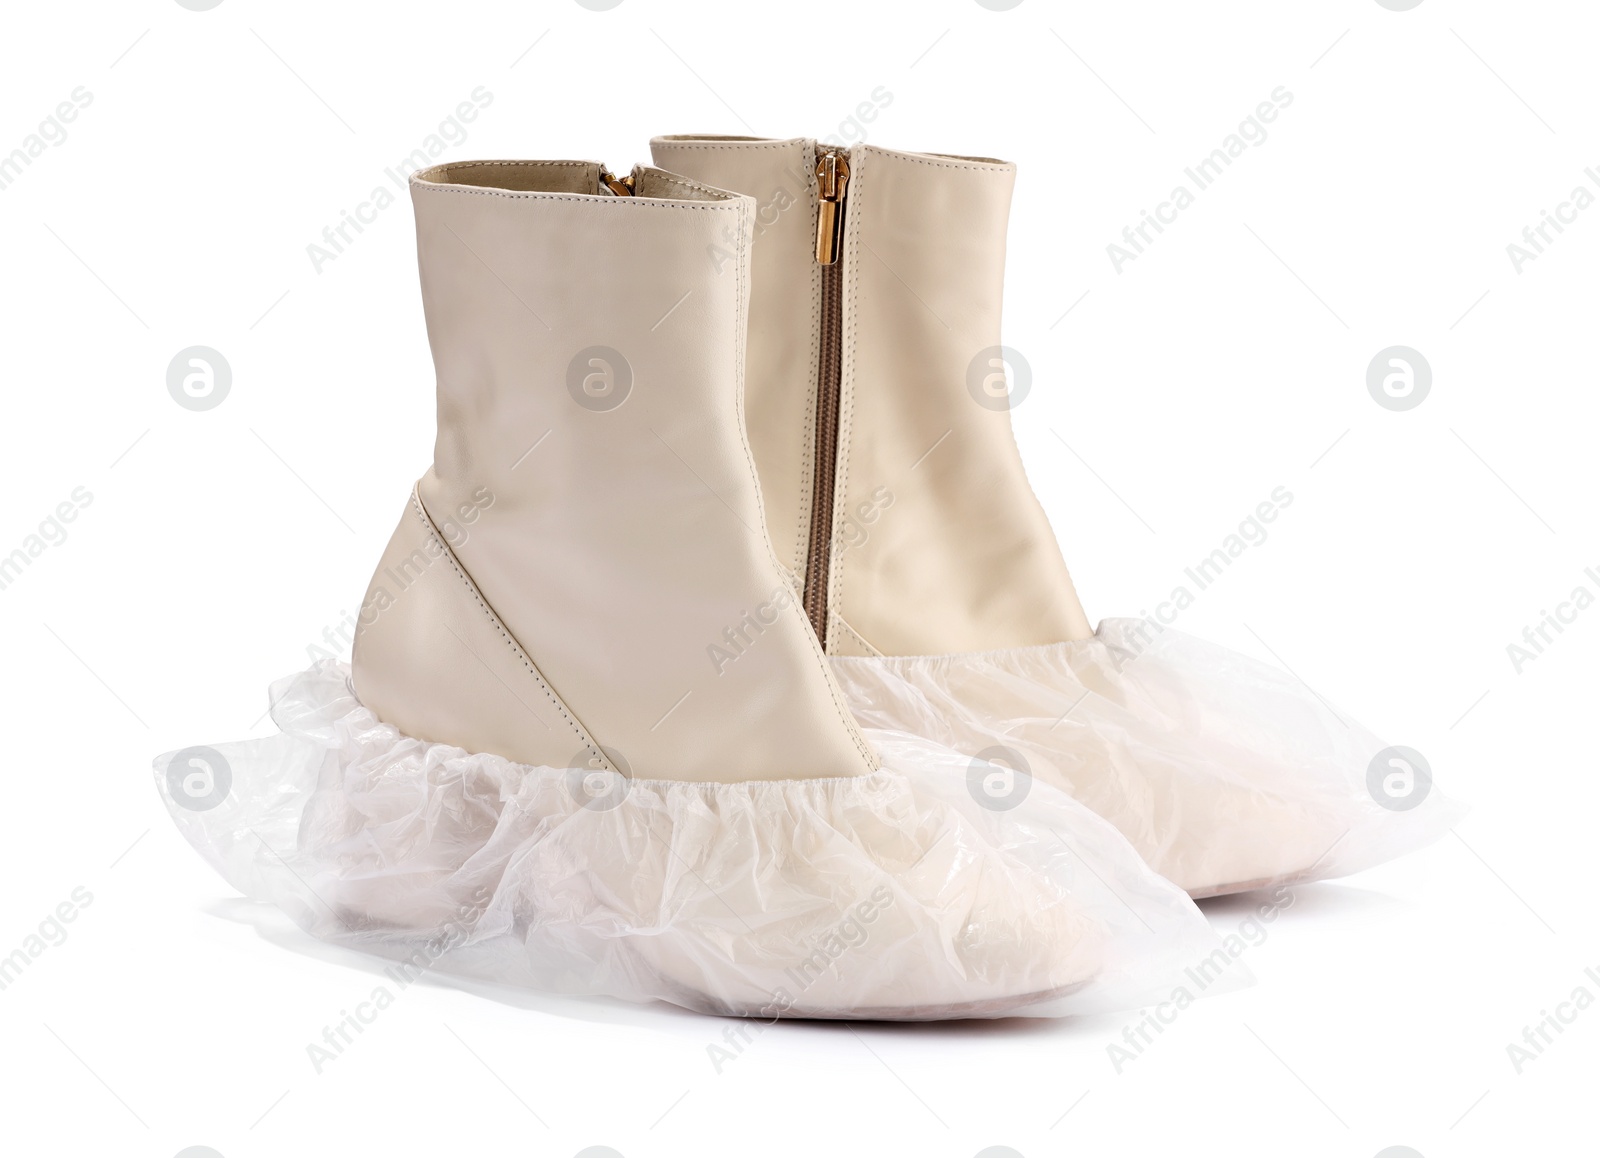 Photo of Women's boots in shoe covers isolated on white